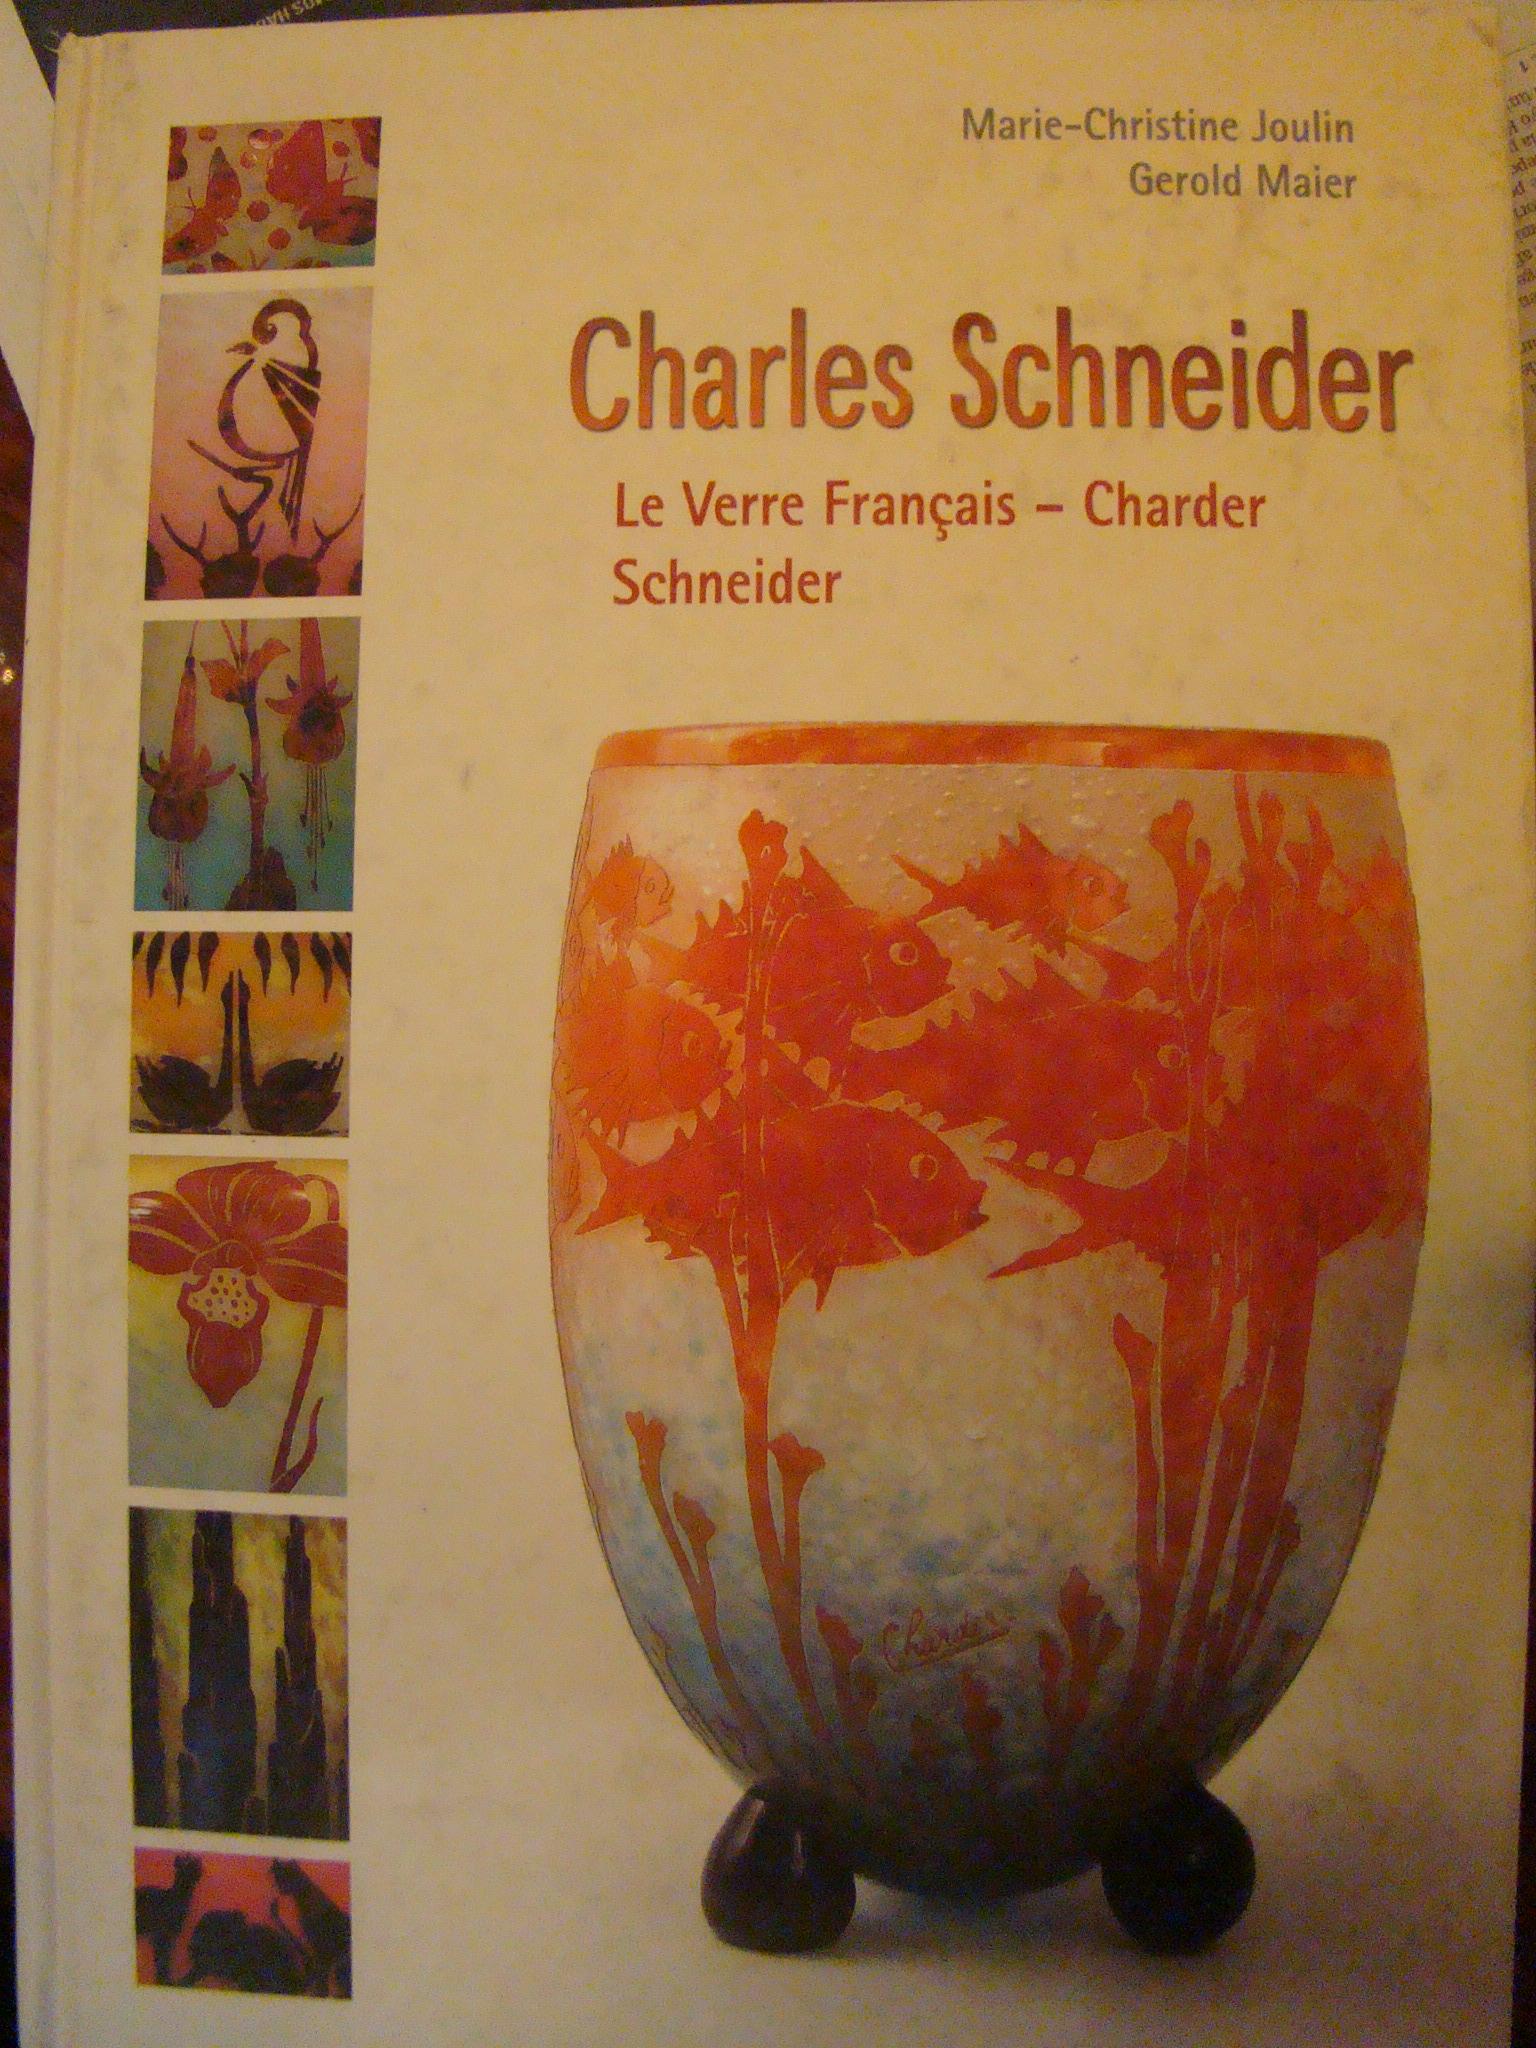 Sign: Charder
CHARDER was a name made up from the first part of Charles and the second part of Schnieder. It was sometimes marked on glass designed by Charles Schneider, particularly pieces in the Le Verre Francais line.
Le Verre Francais was a